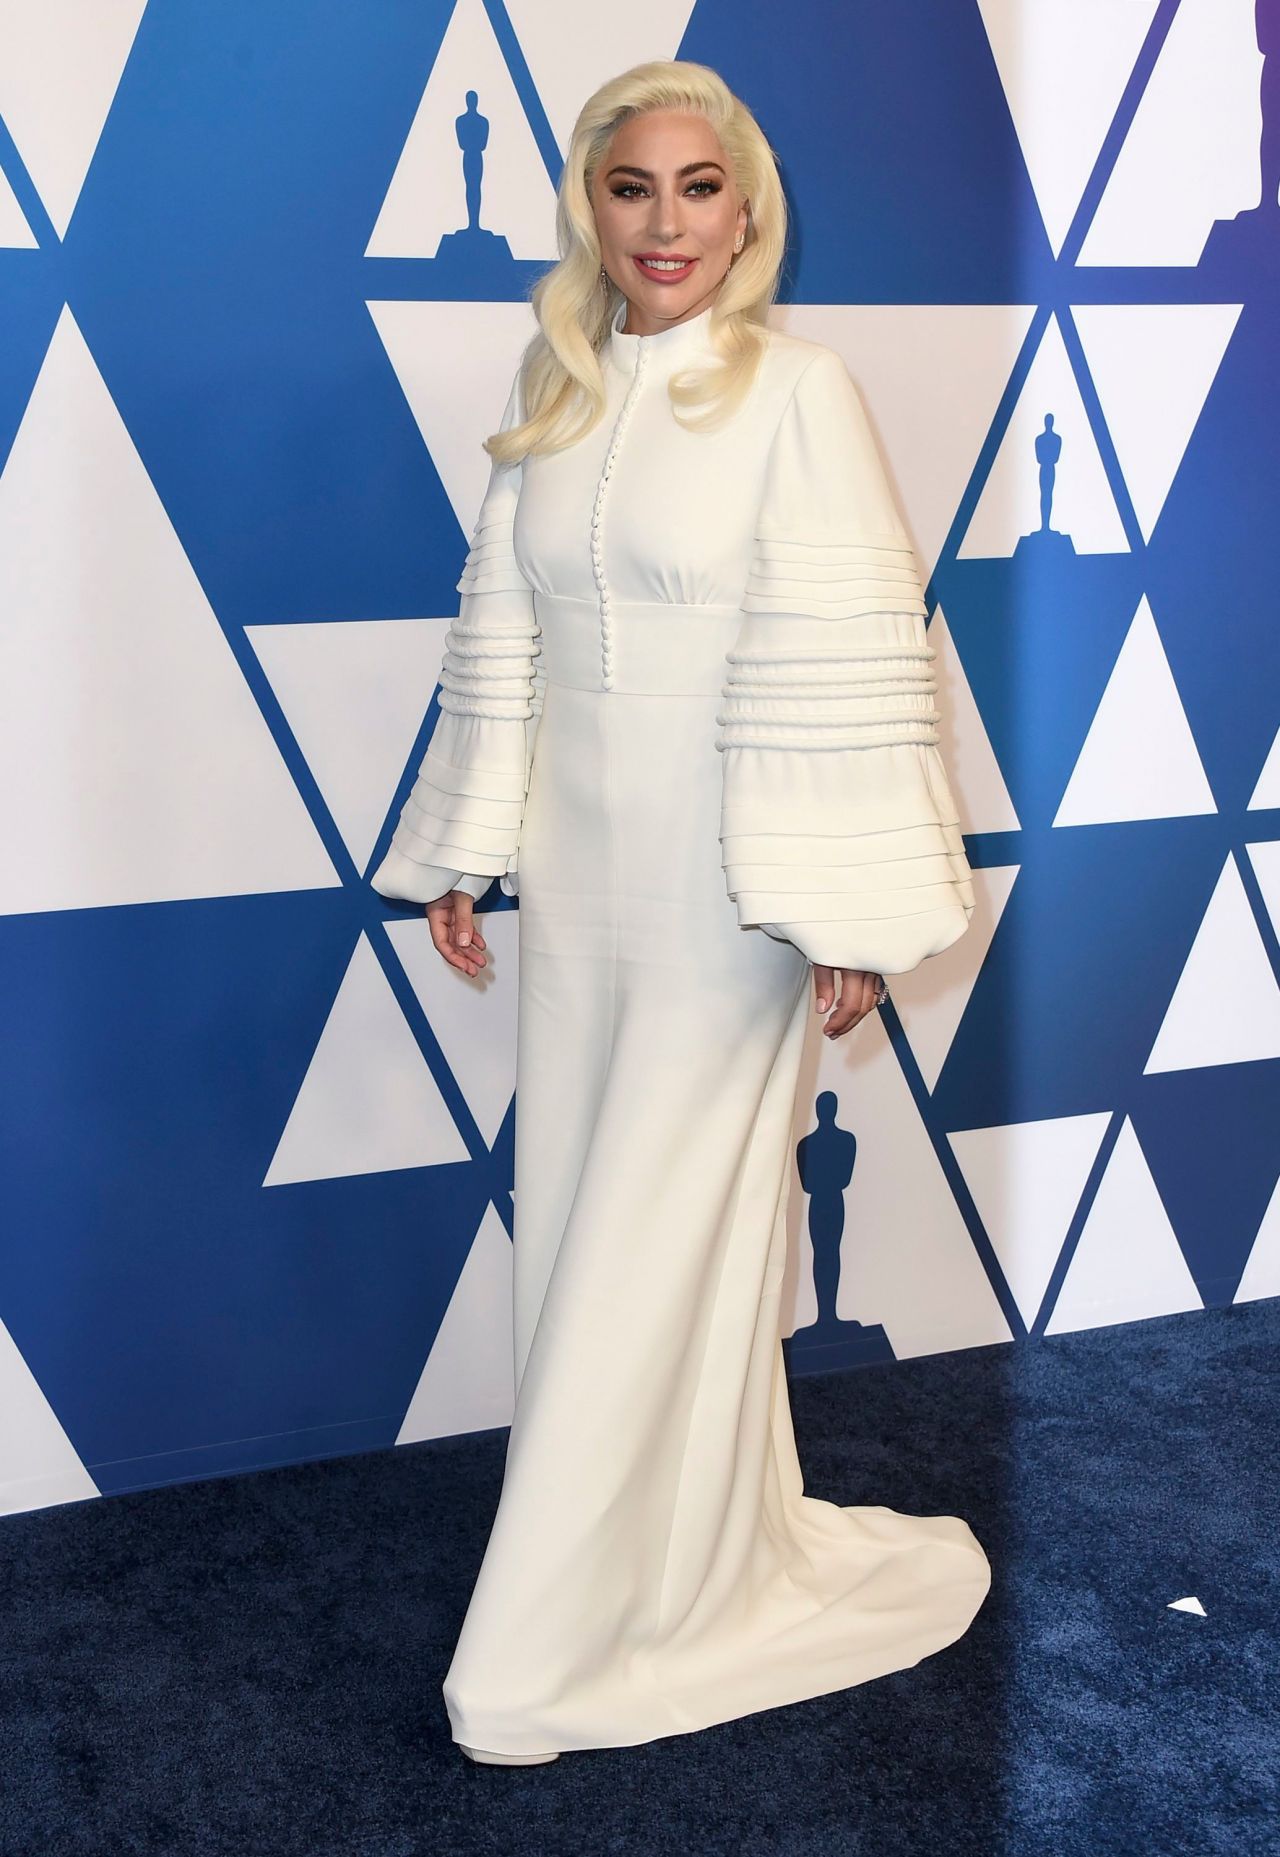 https://celebmafia.com/wp-content/uploads/2019/02/lady-gaga-91st-oscars-nominees-luncheon-in-beverly-hills-19.jpg